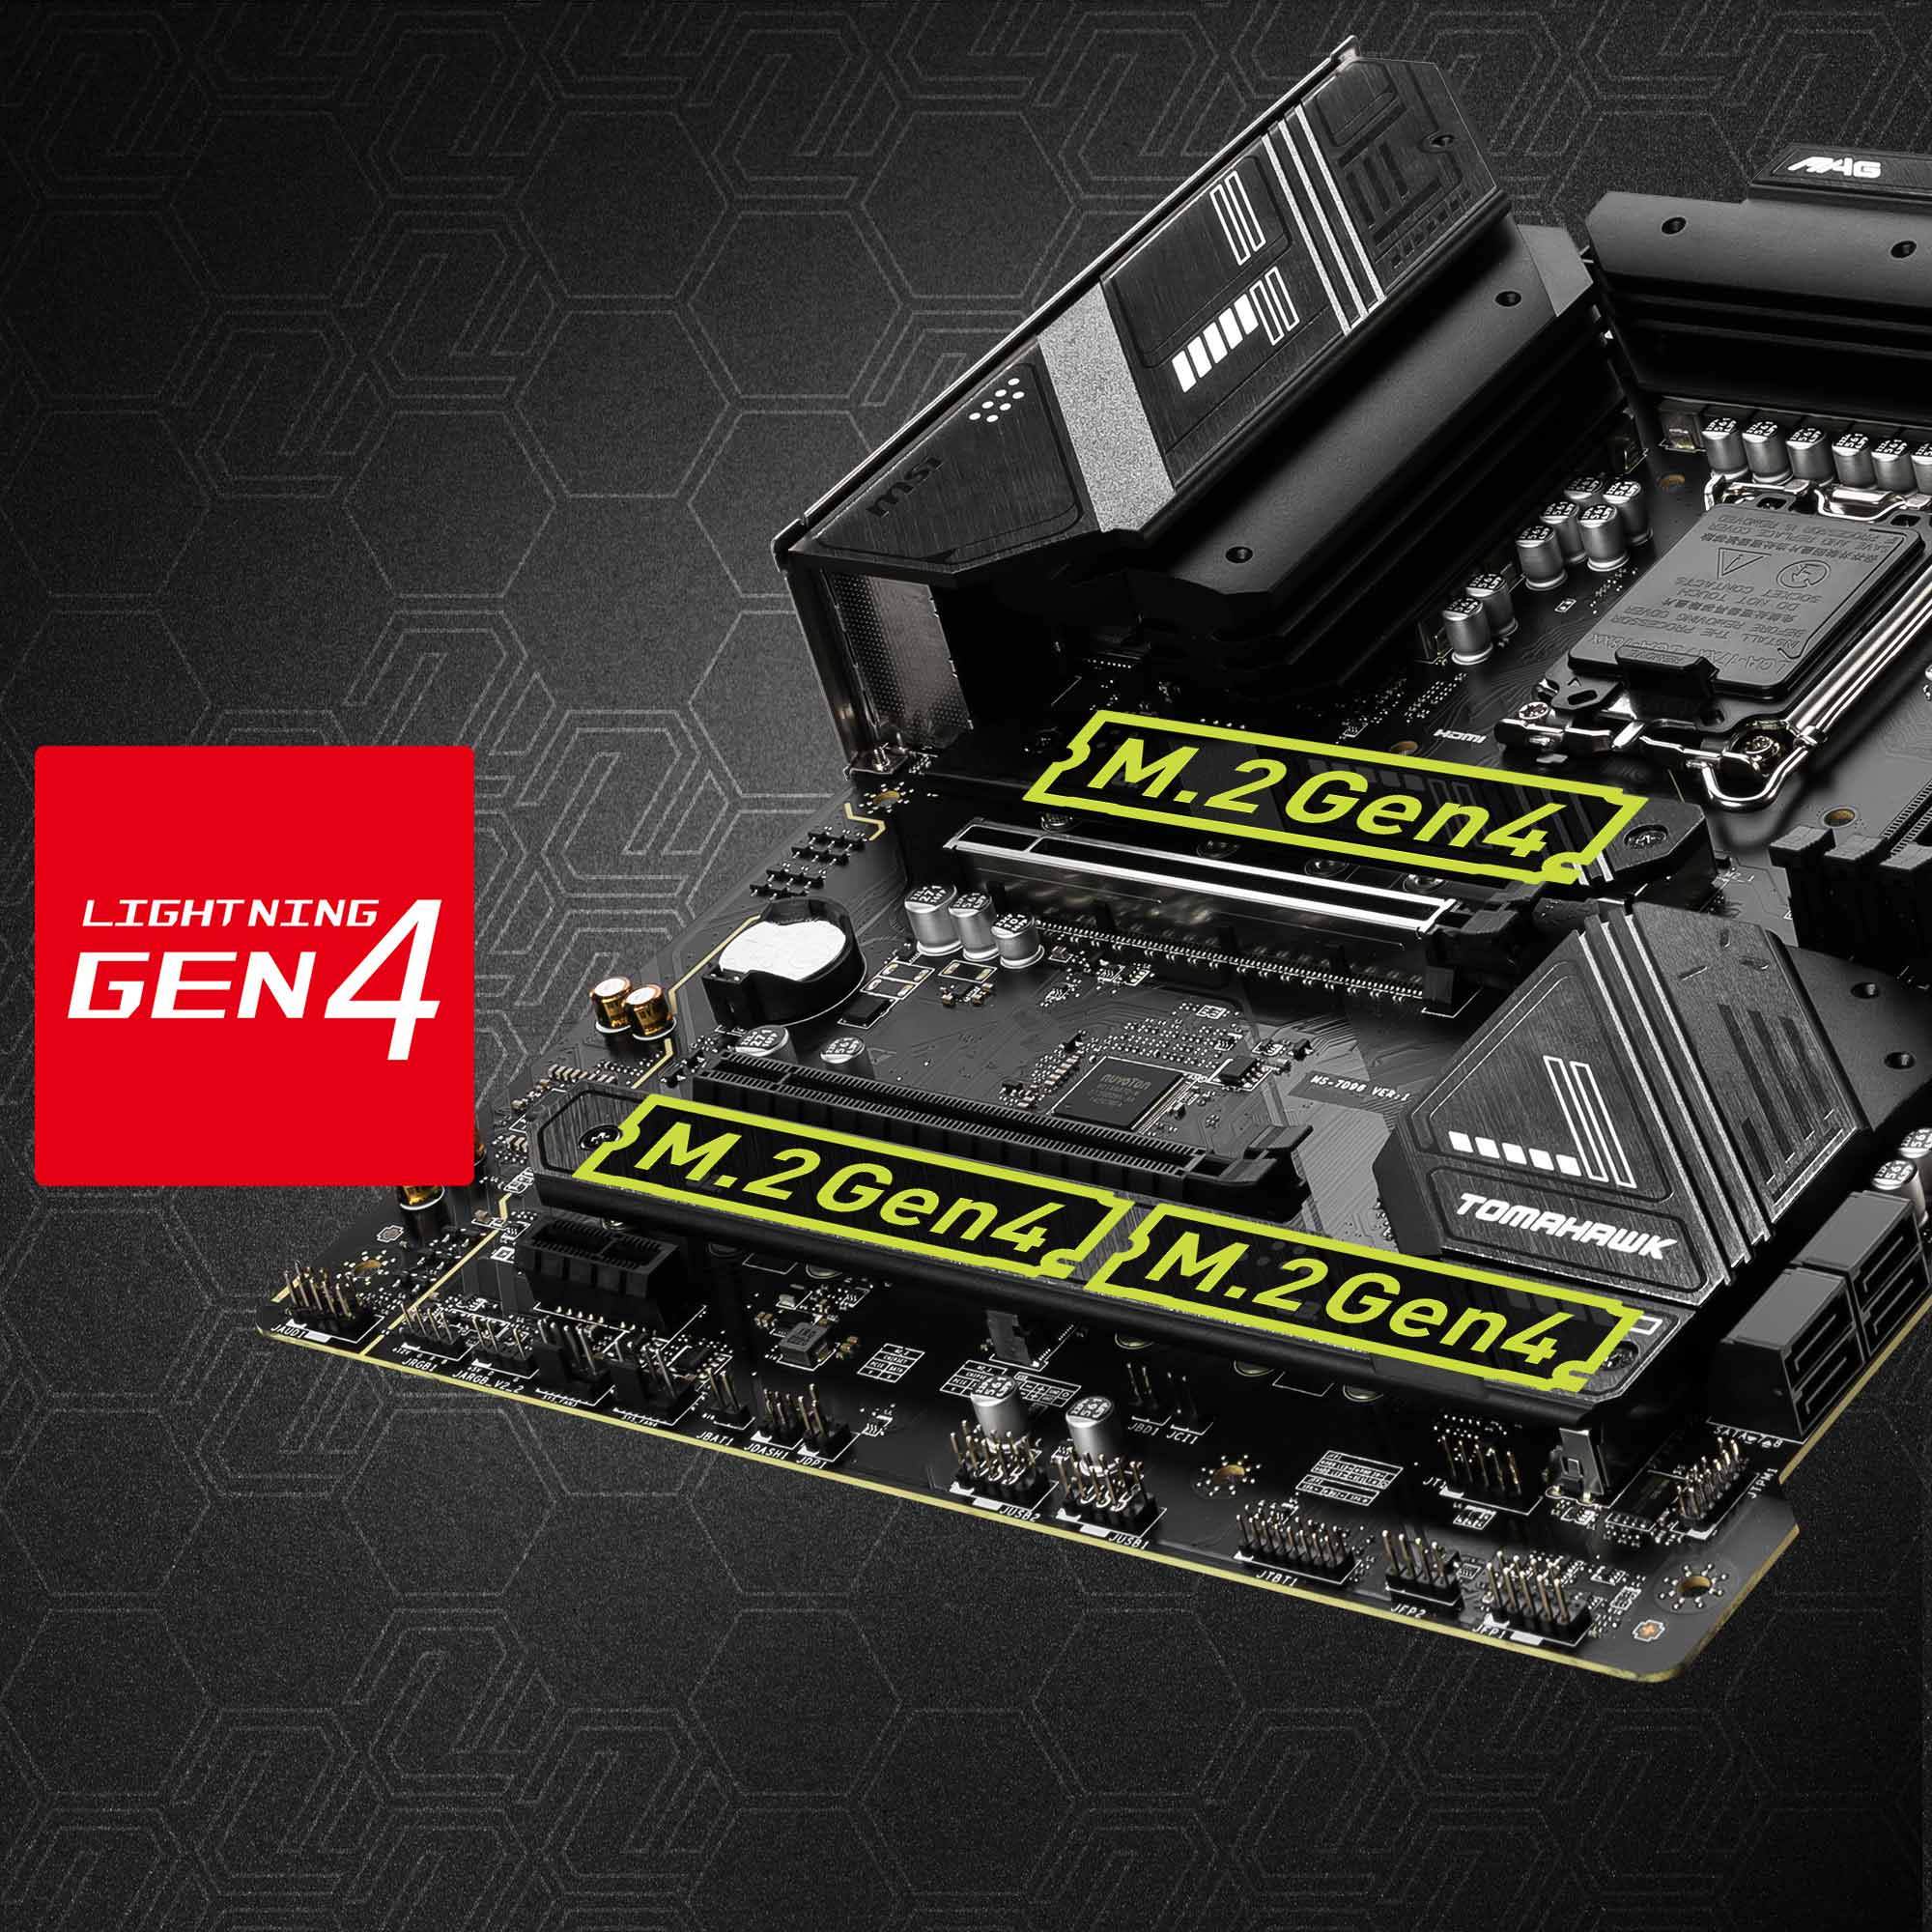 Sponsored Post: Harness the Power of Intel 13th Gen Core with MSI's B760  Motherboards